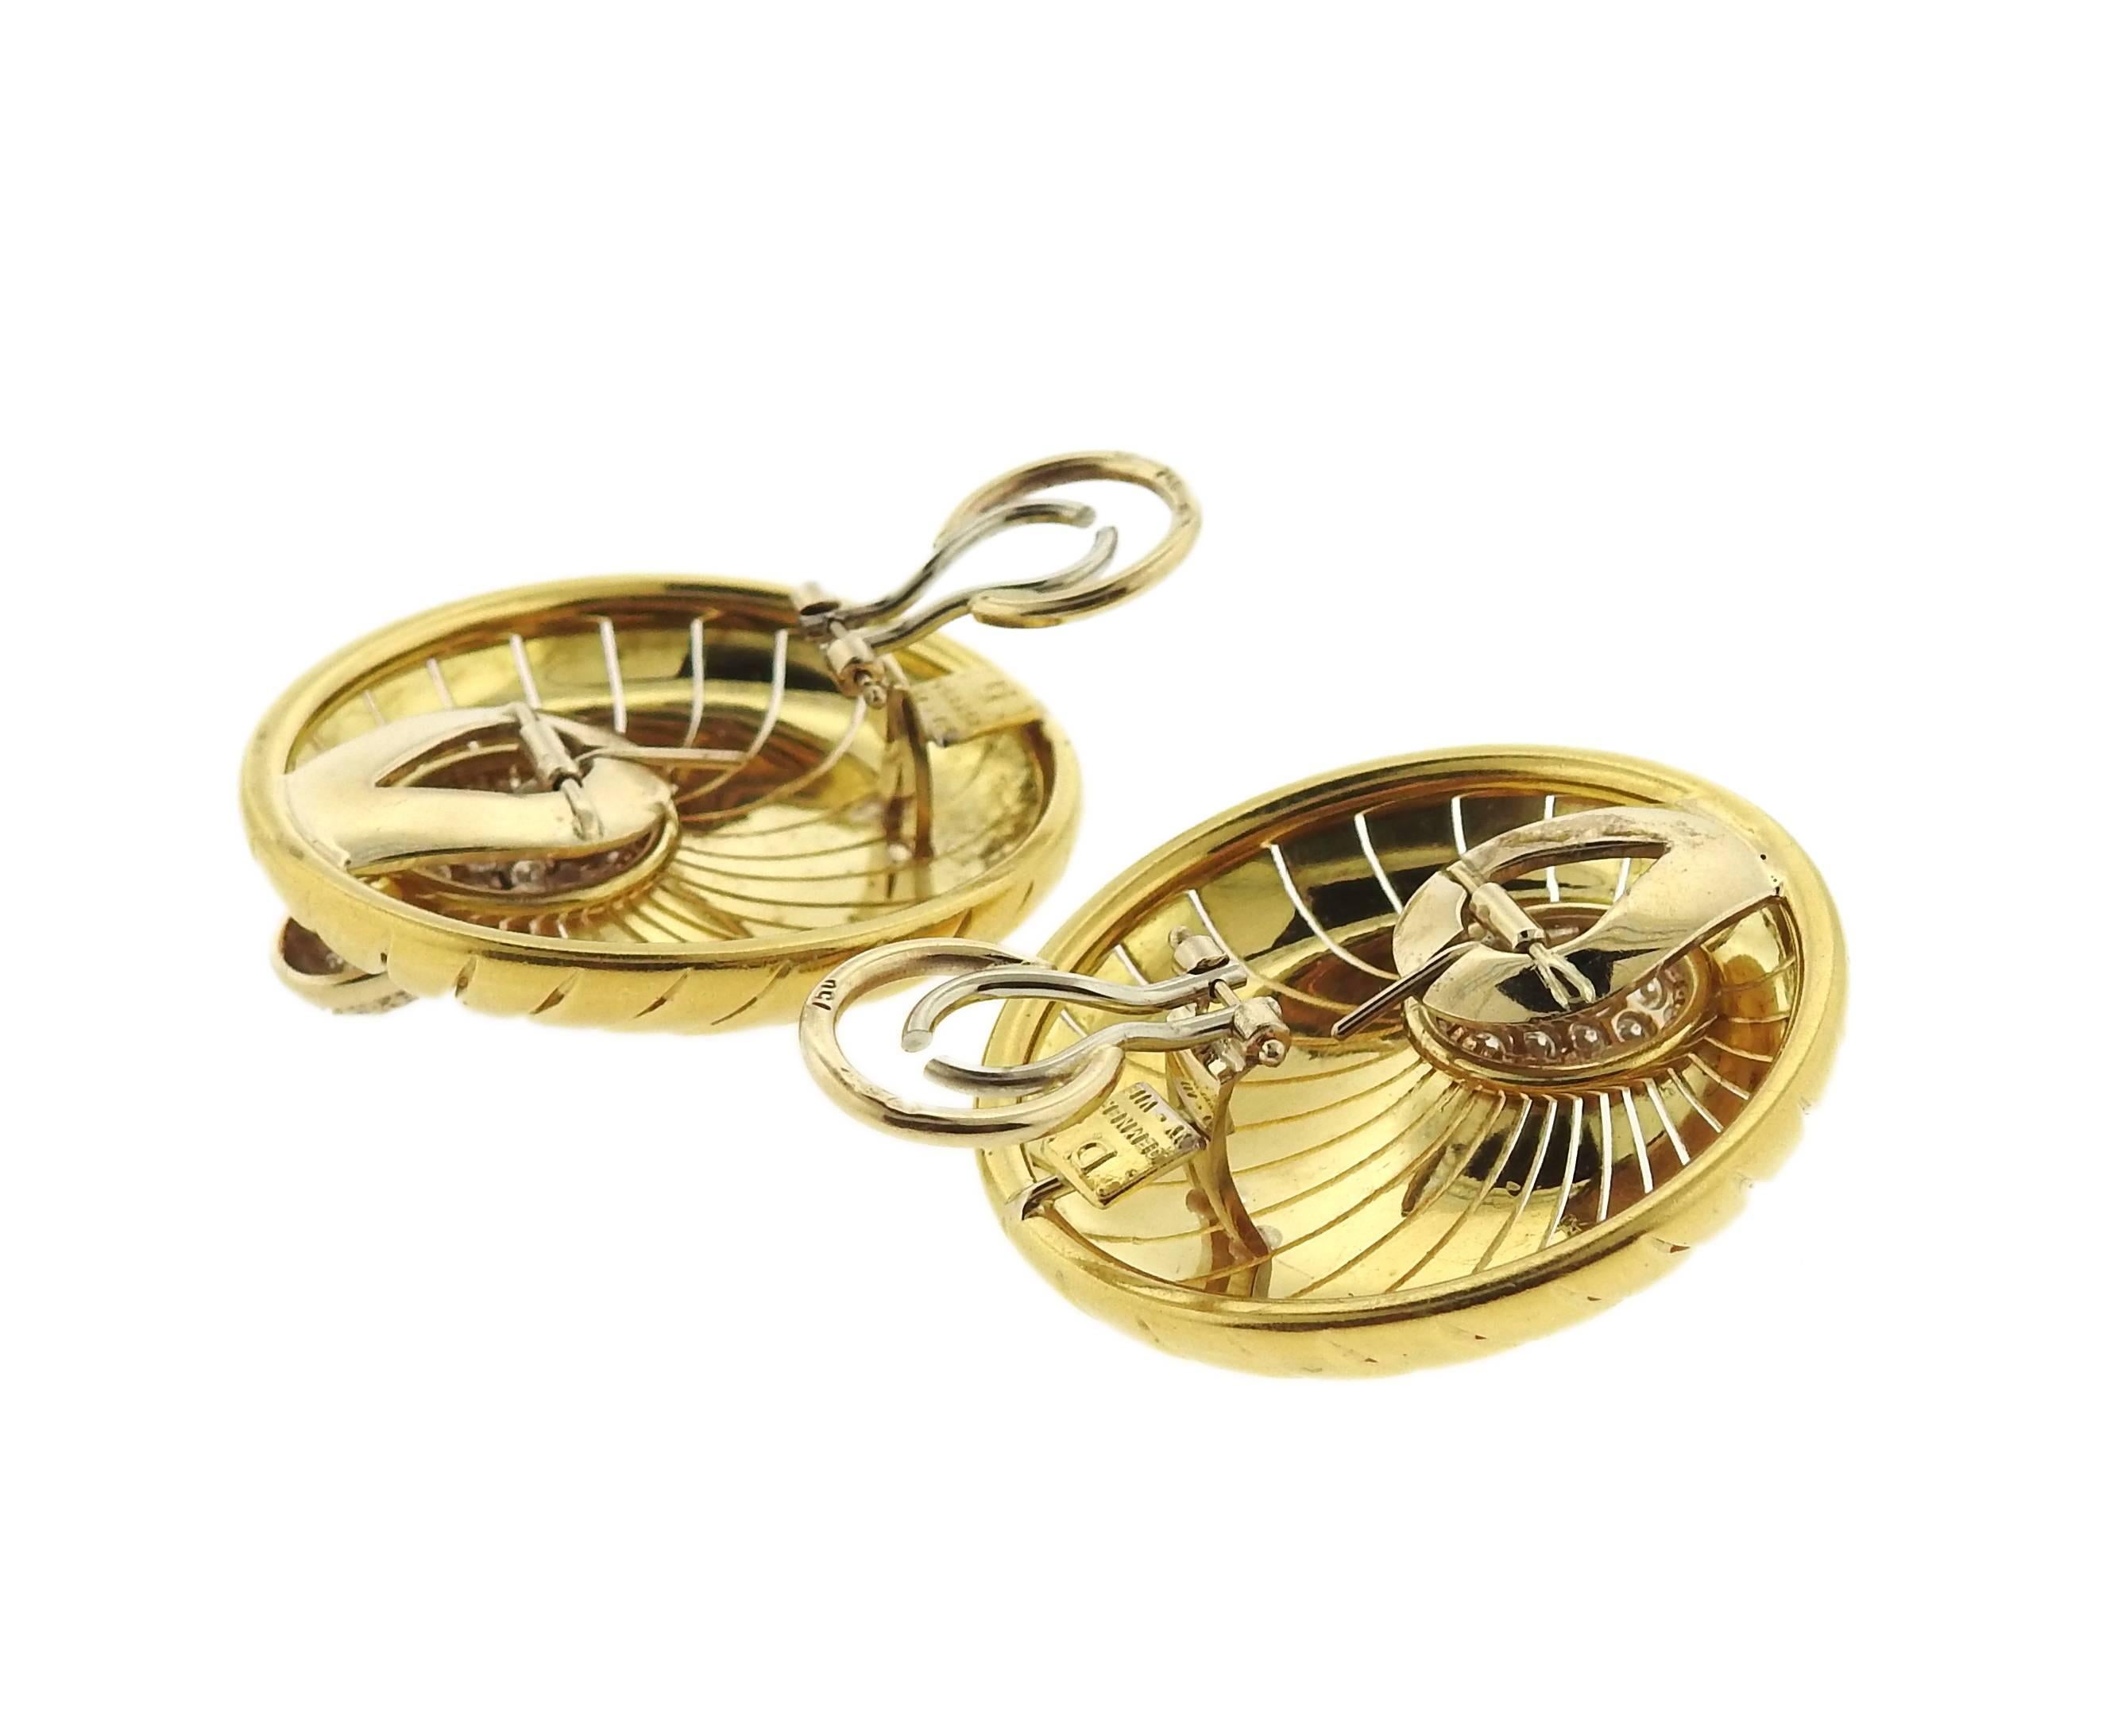 A pair of large 18k gold disc earrings, crafted by Demner, set  with approximately 1.10ctw in diamonds. Earrings measure 35mmin diameter, feature collapsible posts. Marked: Demner, D, Ny-VIE. Weight - 39.2 grams 